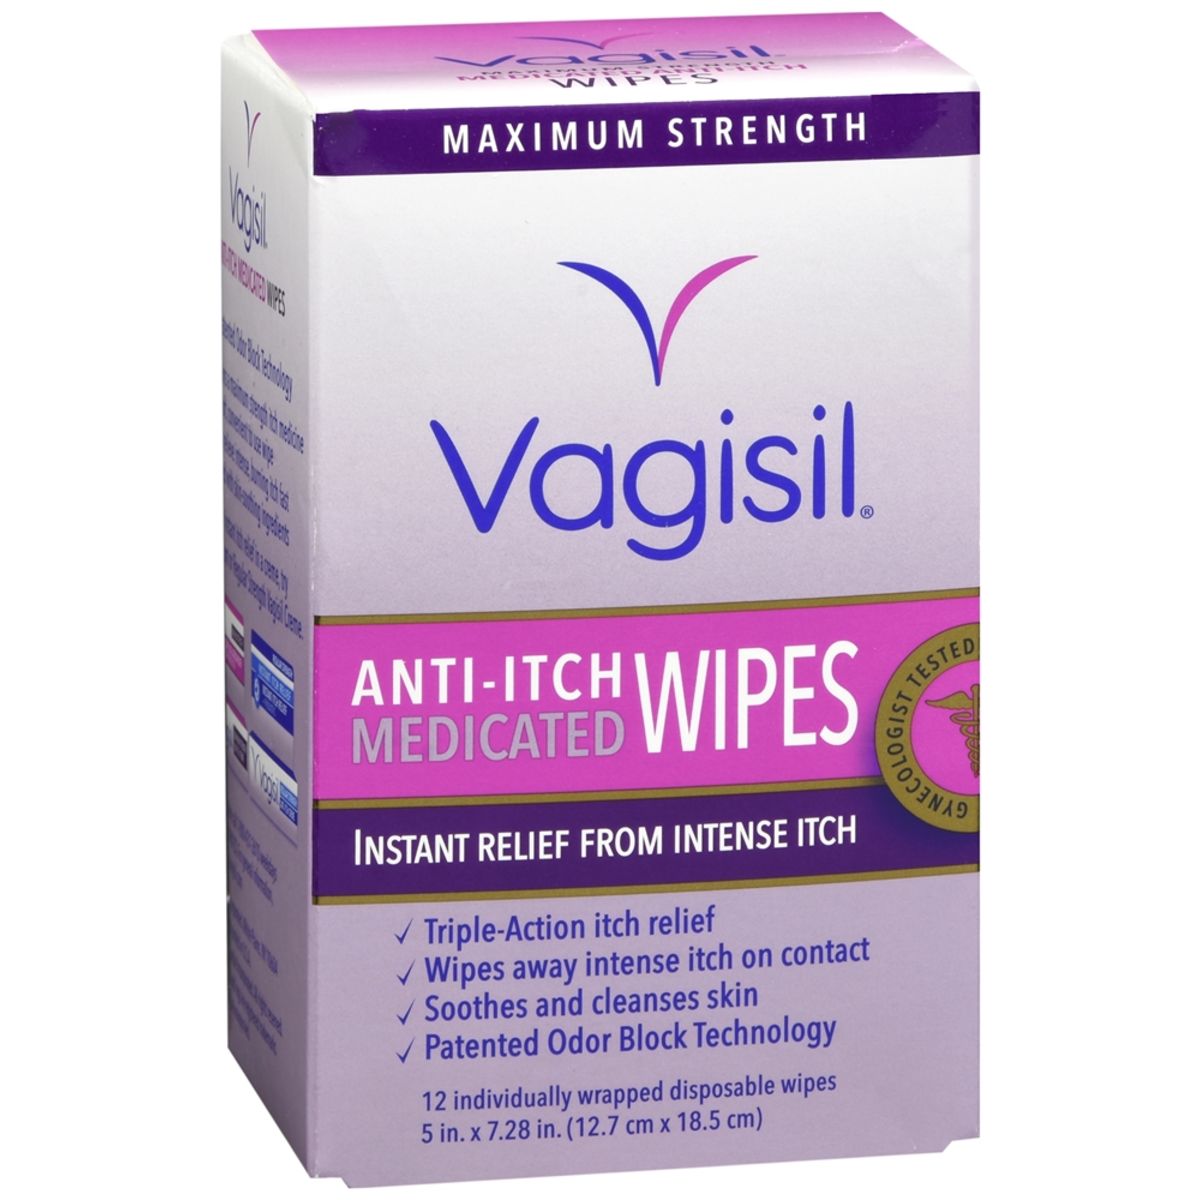 Vagisil Anti-Itch Medicated Wipes Maximum Strength - 12 EA